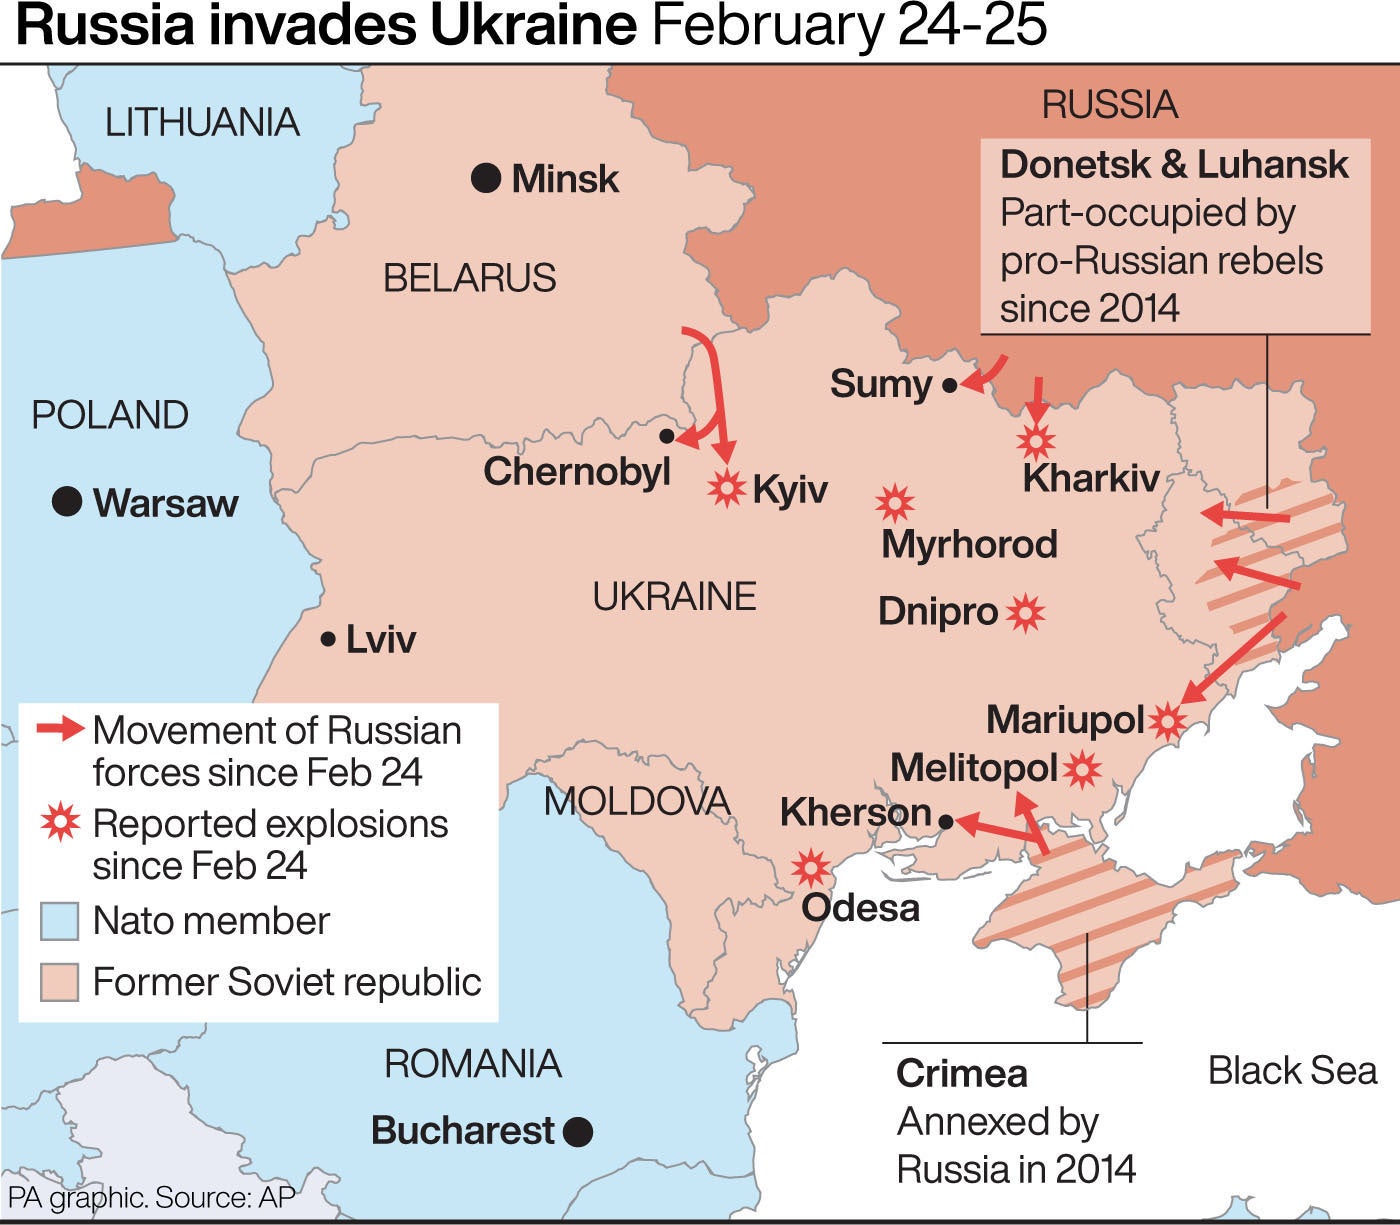 This map details the progress of Russia’s invasion of Ukraine during Thursday and Friday